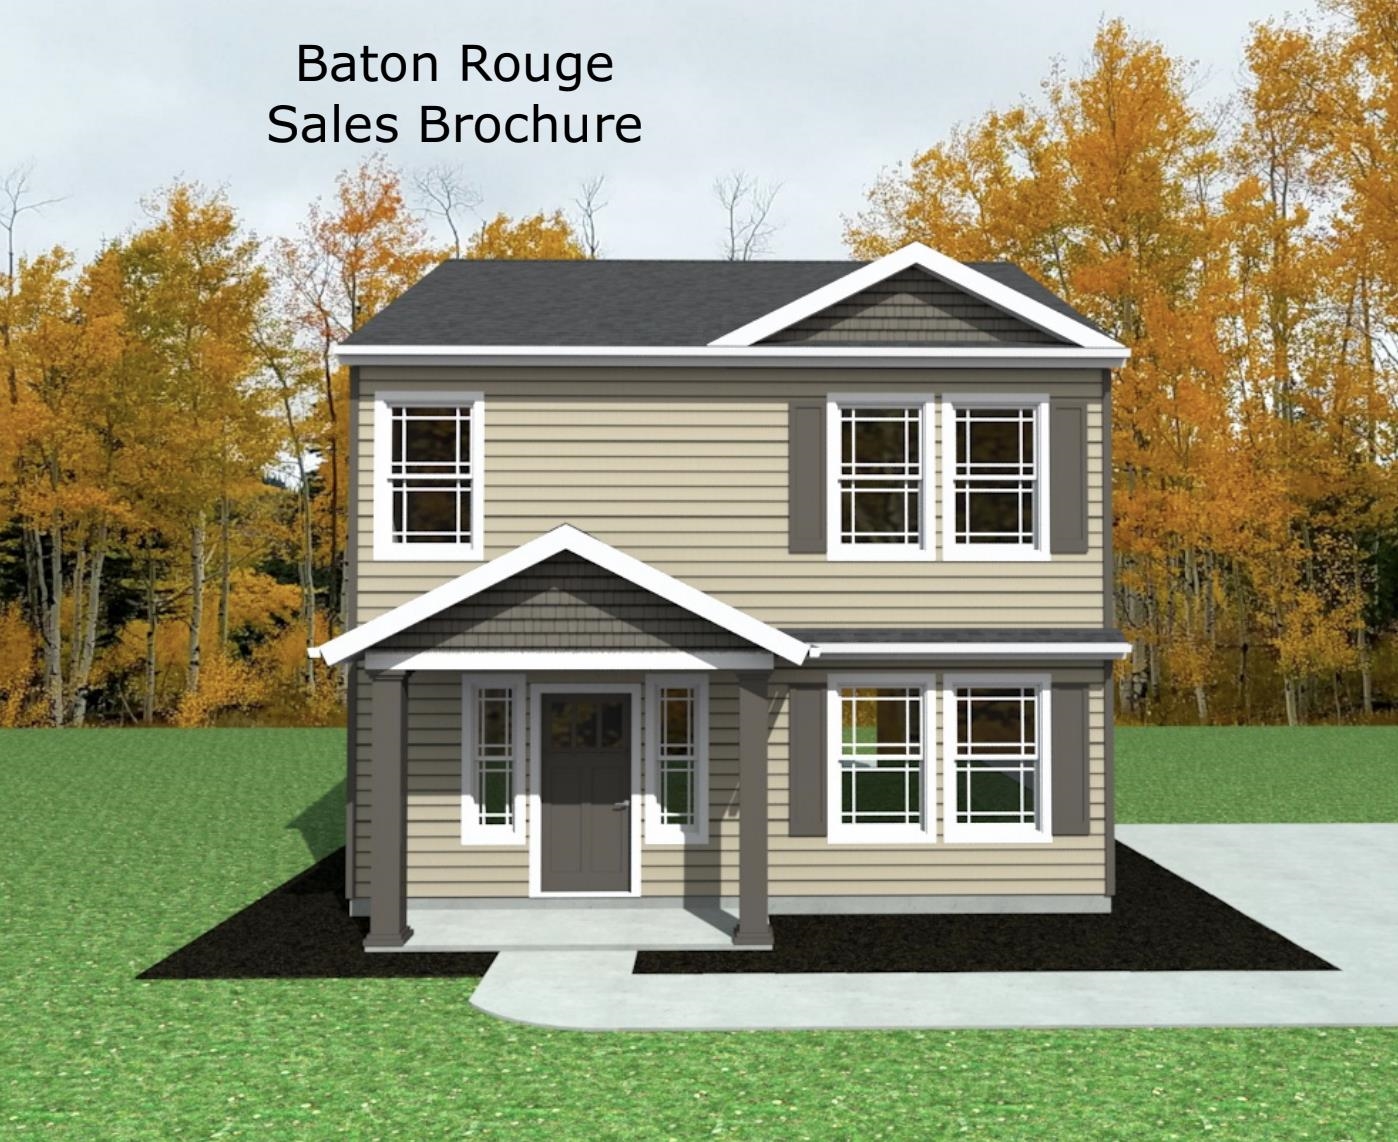 The Baton Rouge two story plan features 3 bedrooms and 2 1/2 bathrooms. The spacious living area is open into the kitchen/dining area. The master bedroom features a walk-in closet and full bathroom. 30-year architectural shingles, site built construction, and a "2-10" warranty are included to give you peace of mind. Lot 7. Preferred Lender/Attorney Closing Costs Incentive Offered!